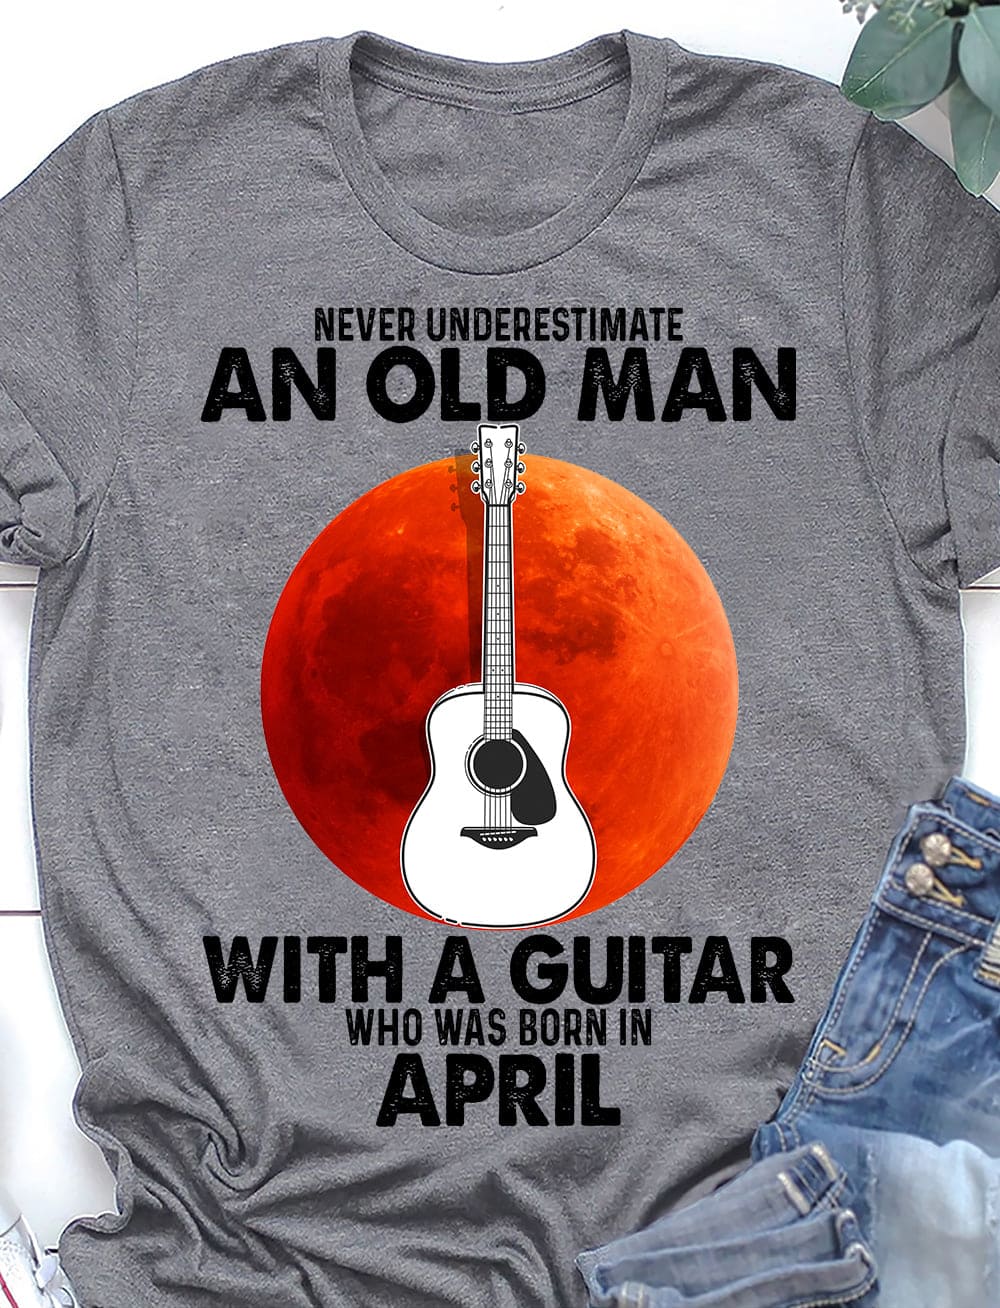 Never underestimate an old man with a guitar who was born in April - Gift for old guitarist